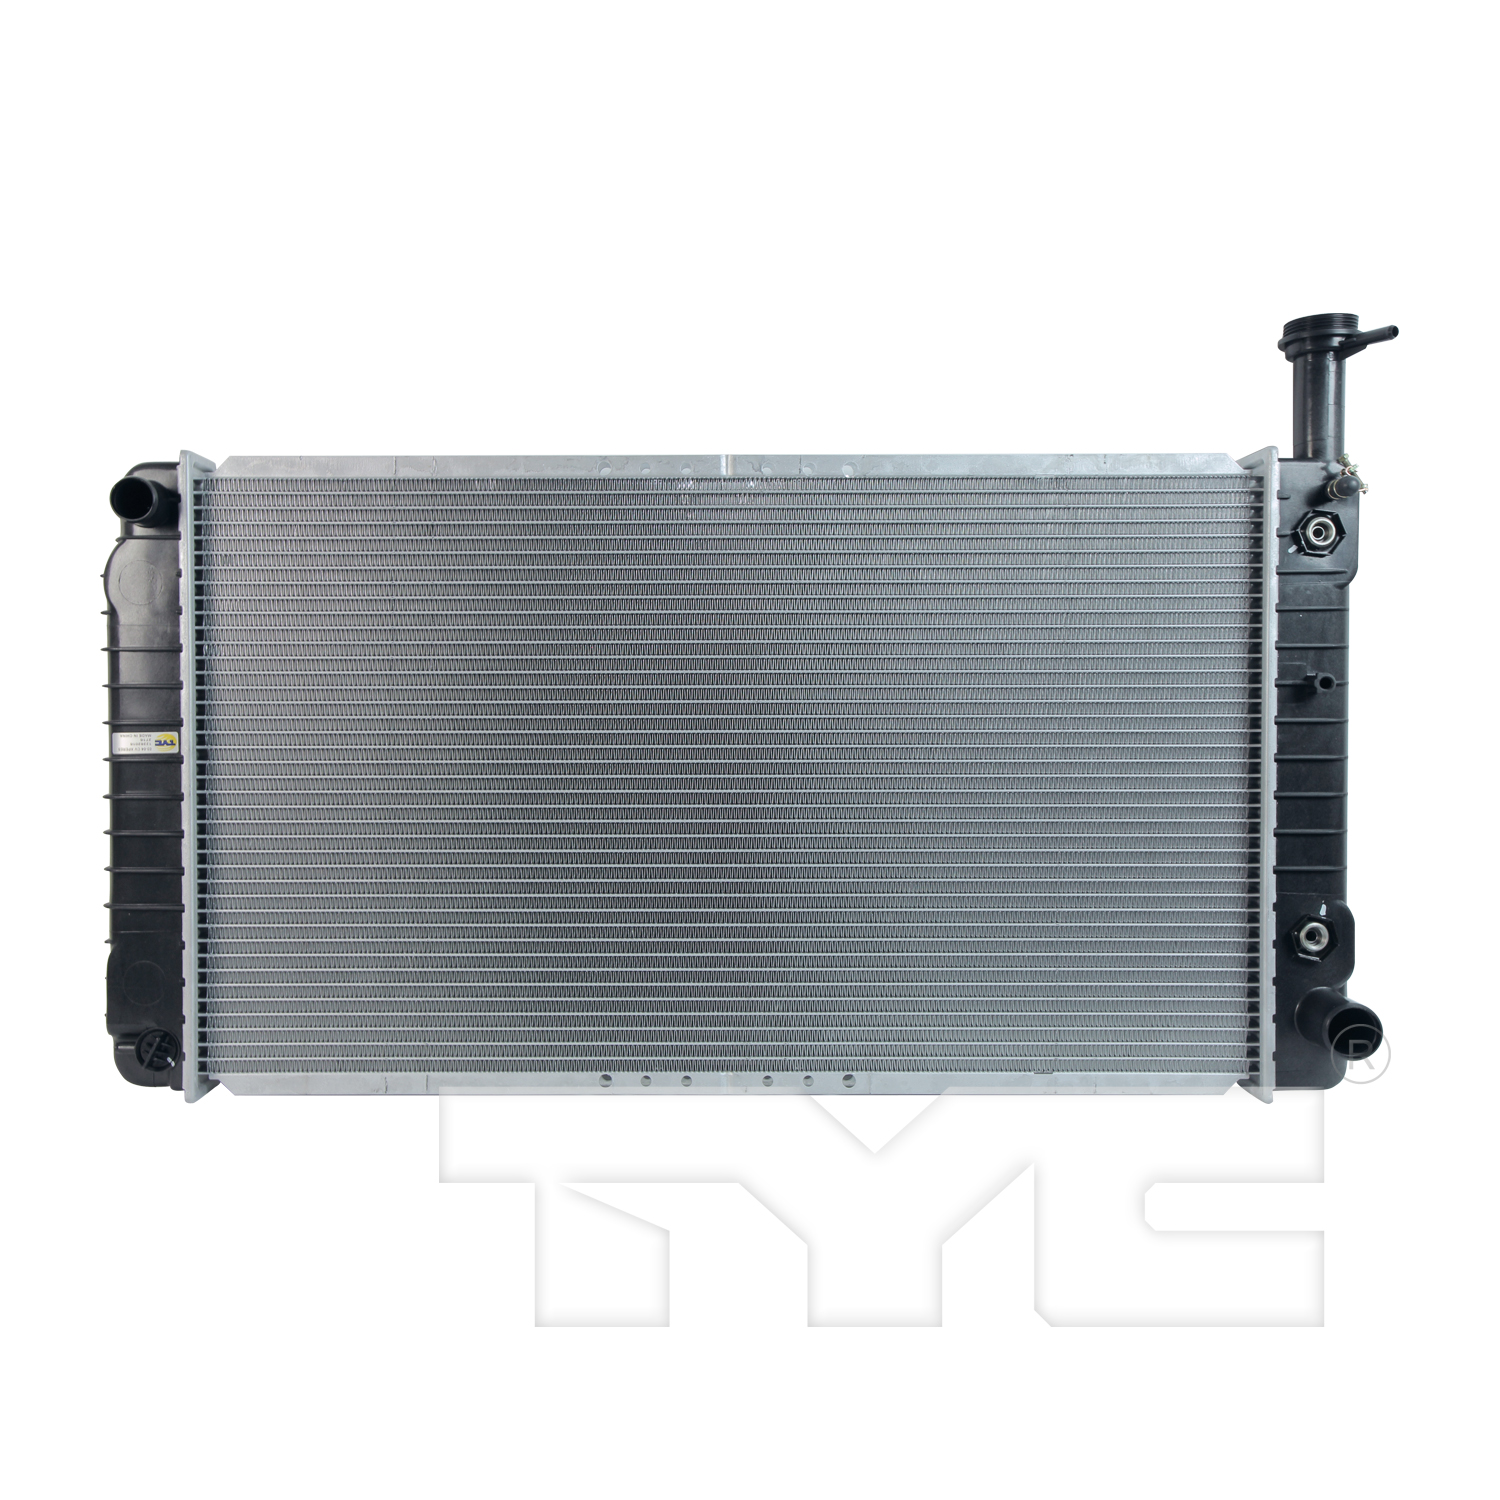 Aftermarket RADIATORS for CHEVROLET - EXPRESS 1500, EXPRESS 1500,03-04,Radiator assembly